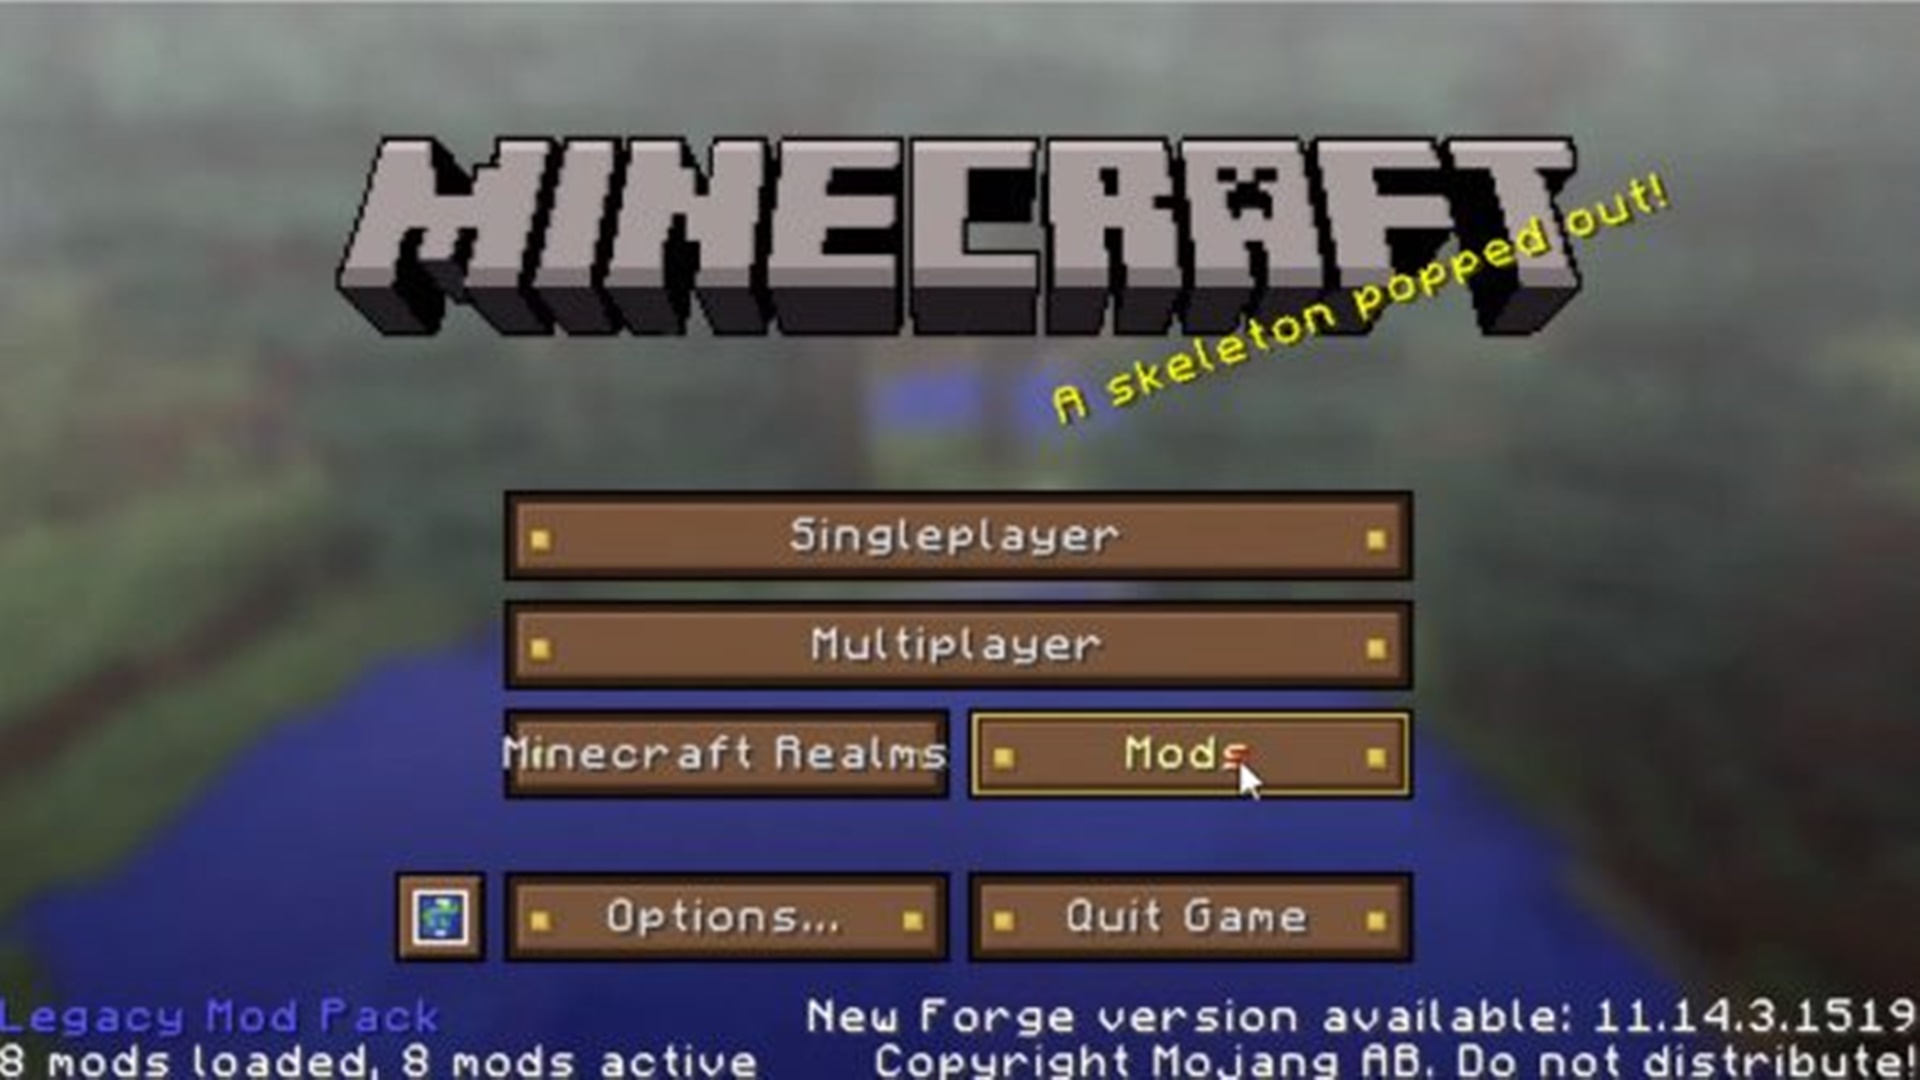 free download minecraft full version for pc